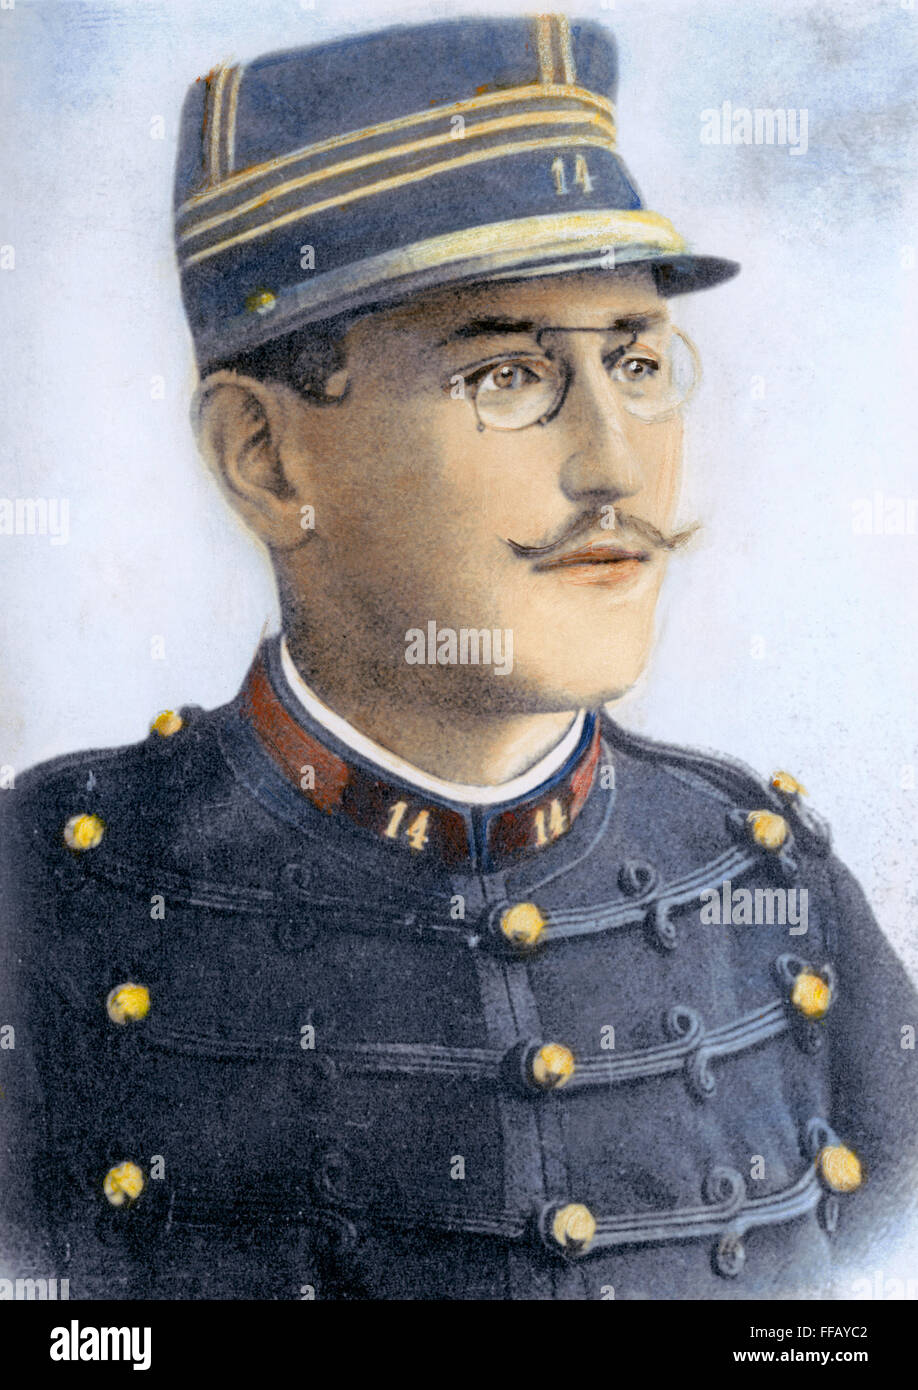 ALFRED DREYFUS (1859-1935). /nFrench army officer. Oil over a photograph, c1894. Stock Photo